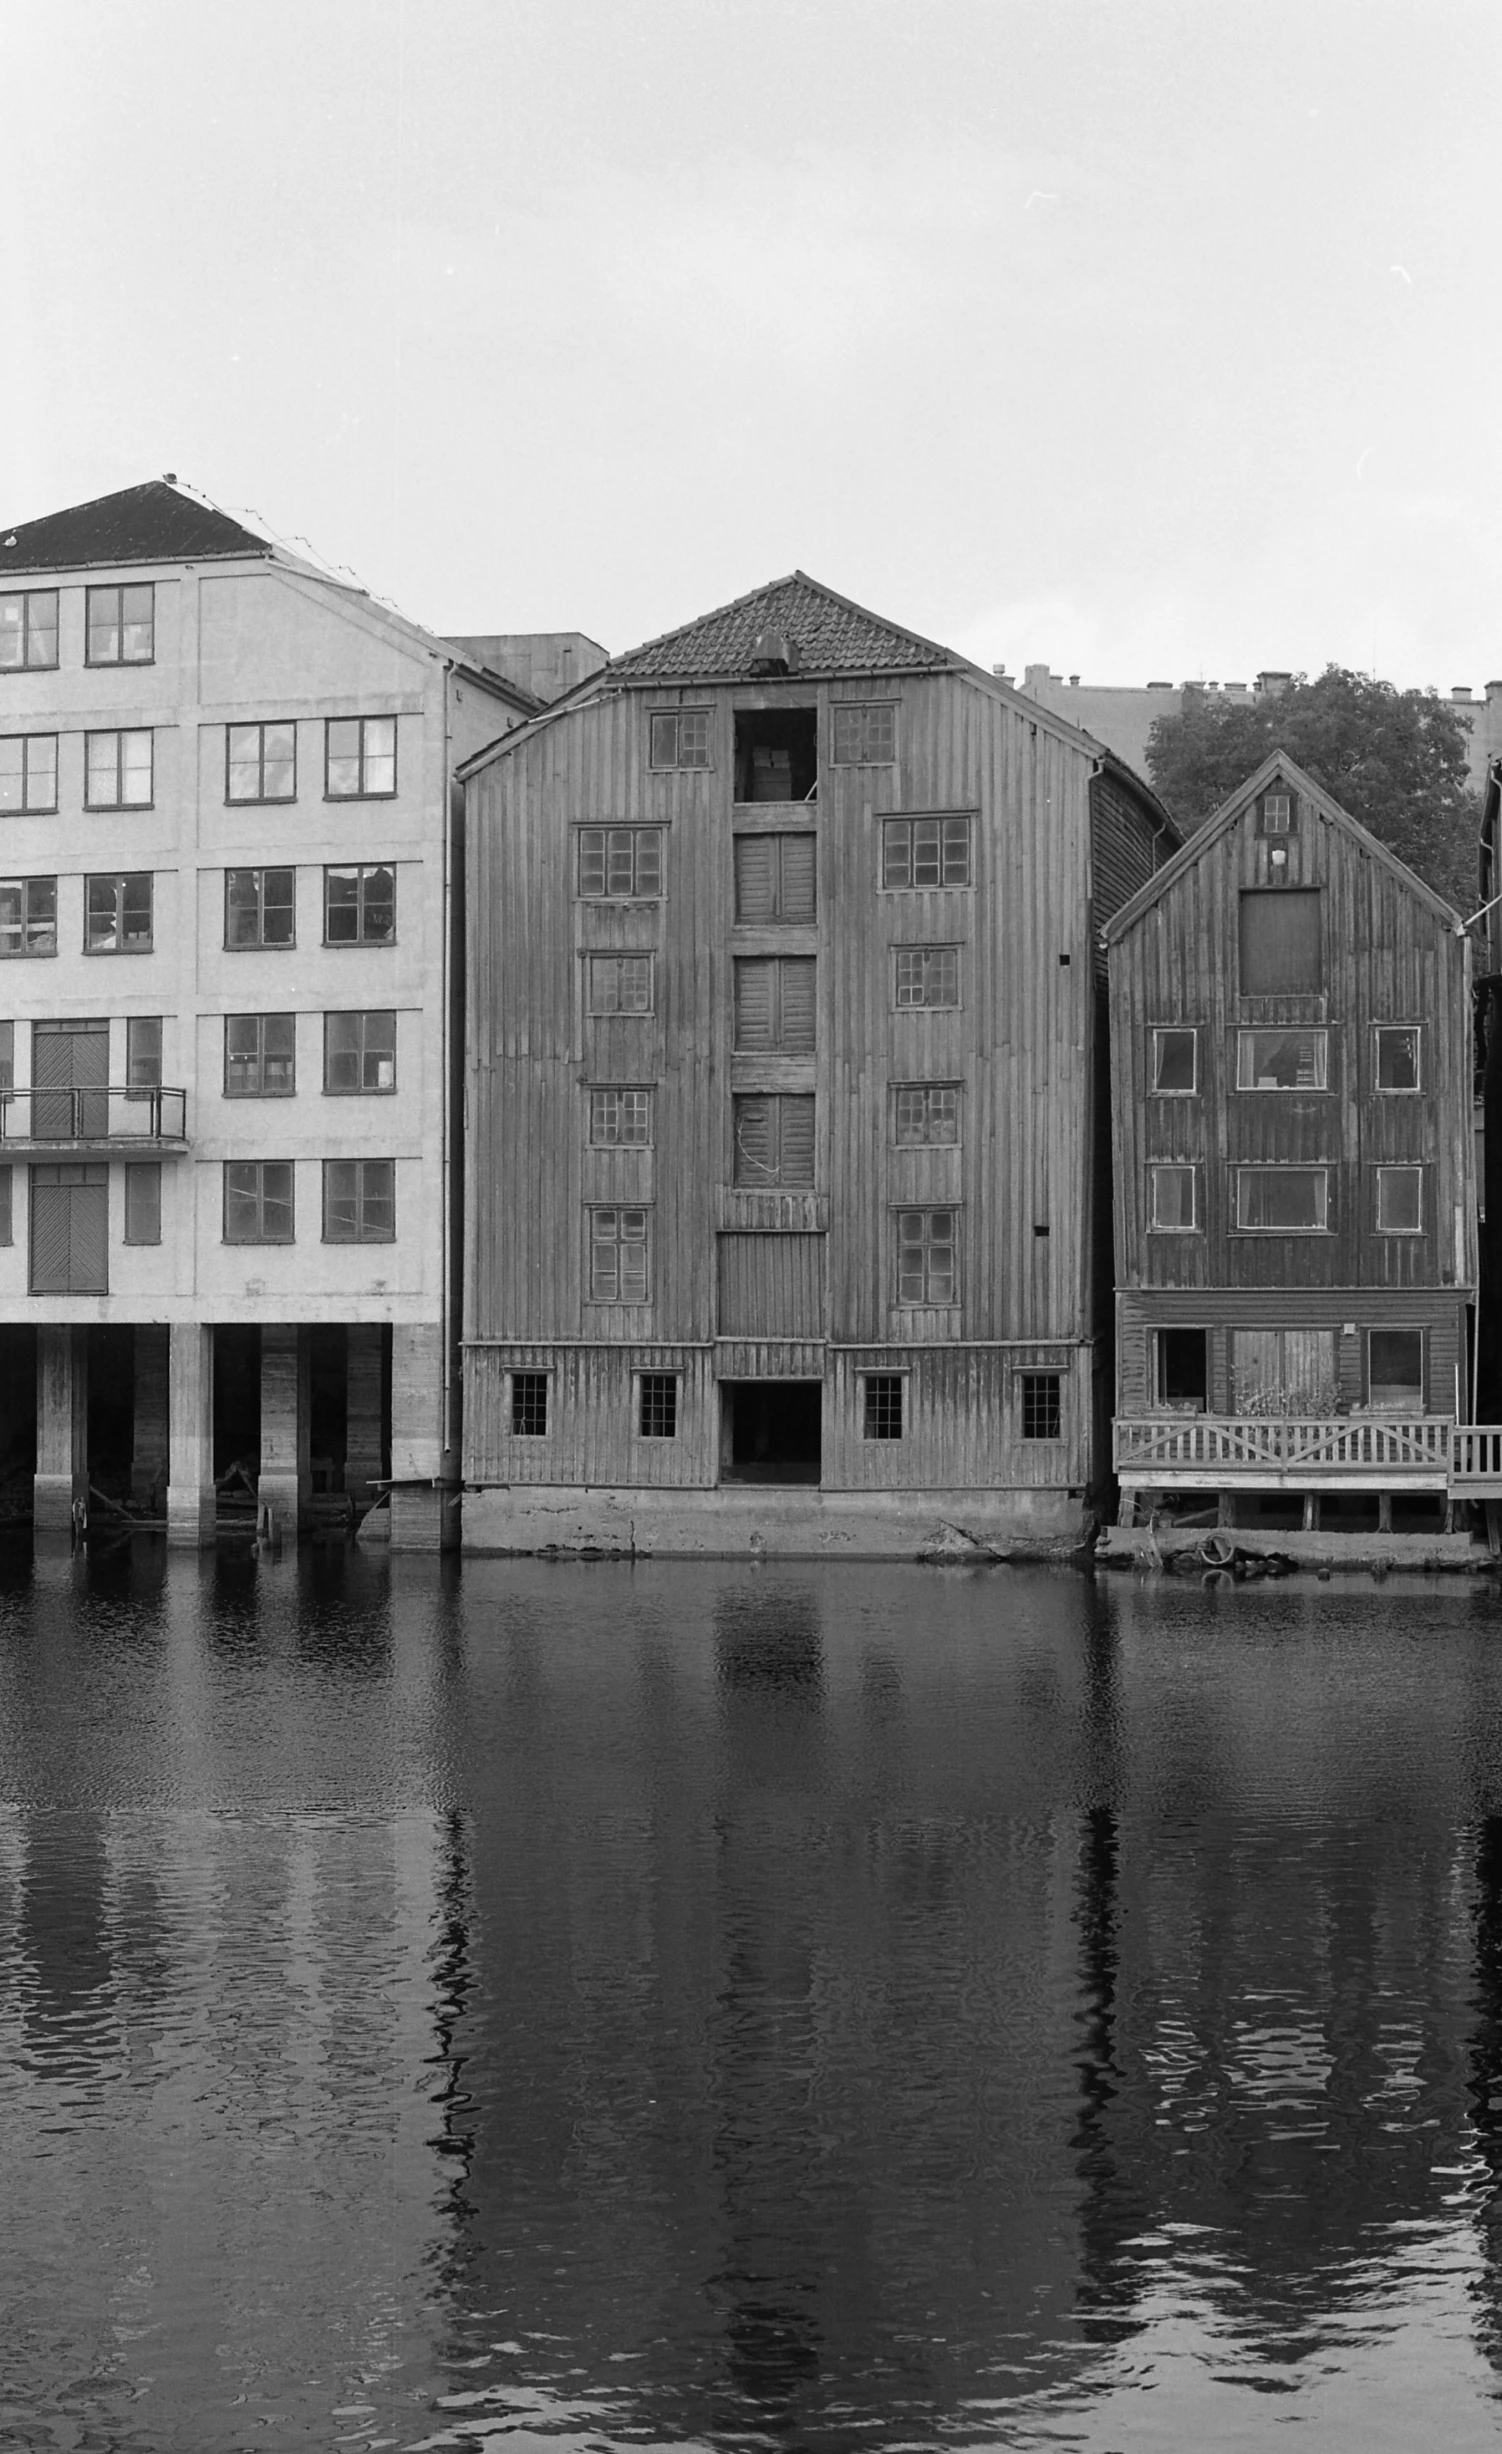 a black and white po of some buildings over water